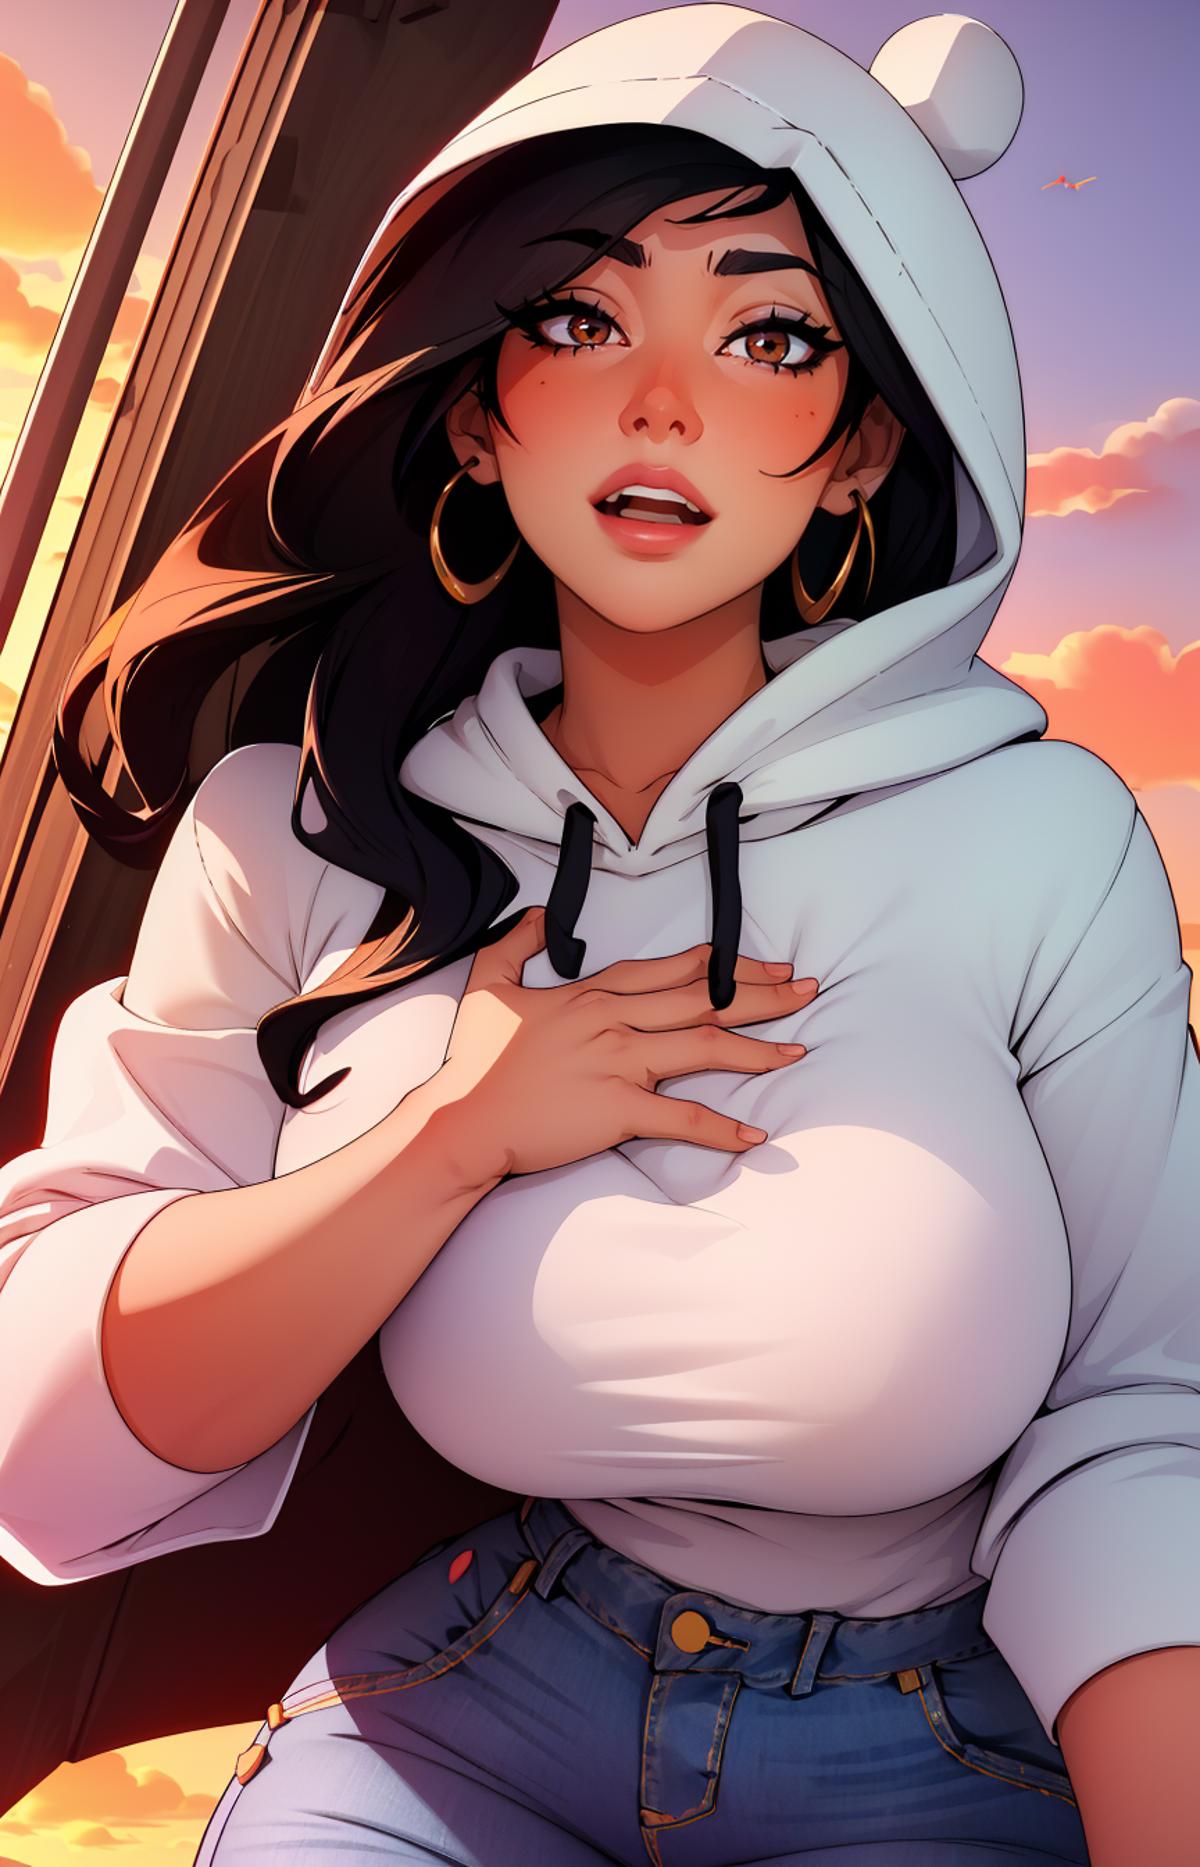 A woman wearing a white hoodie posing with her hand on her chest.